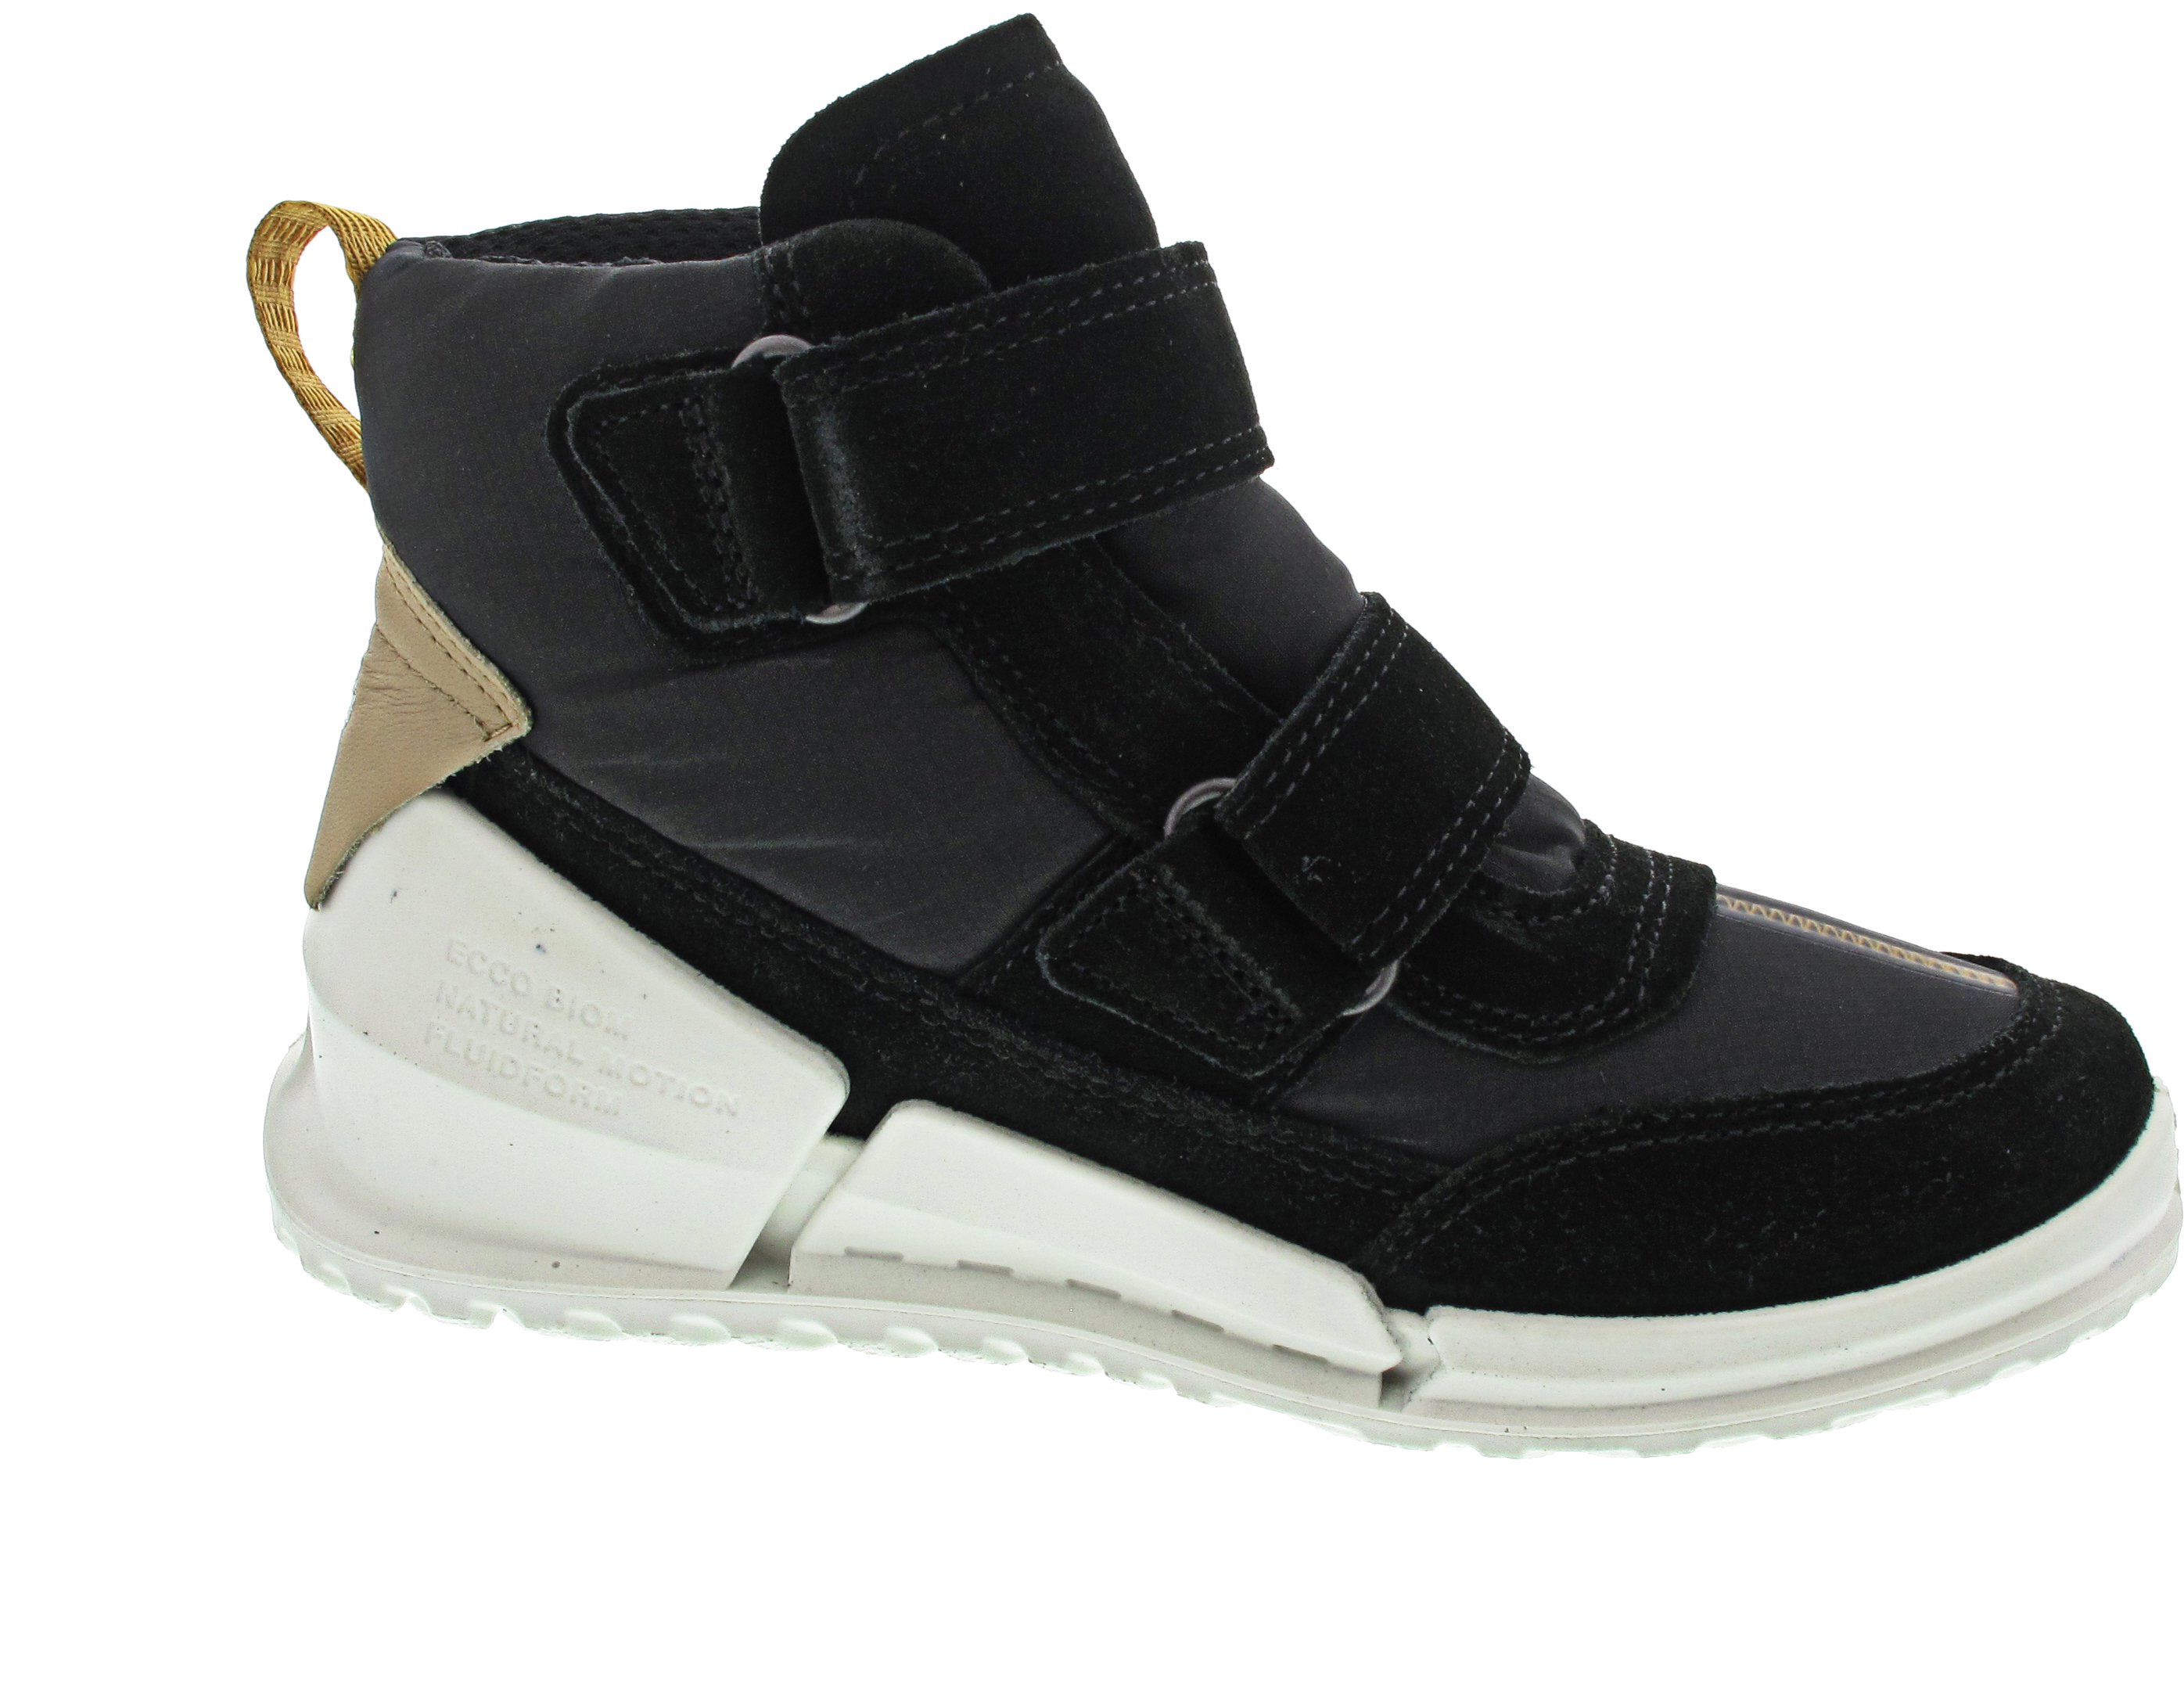 Ecco Biom K1 Ankle Boot